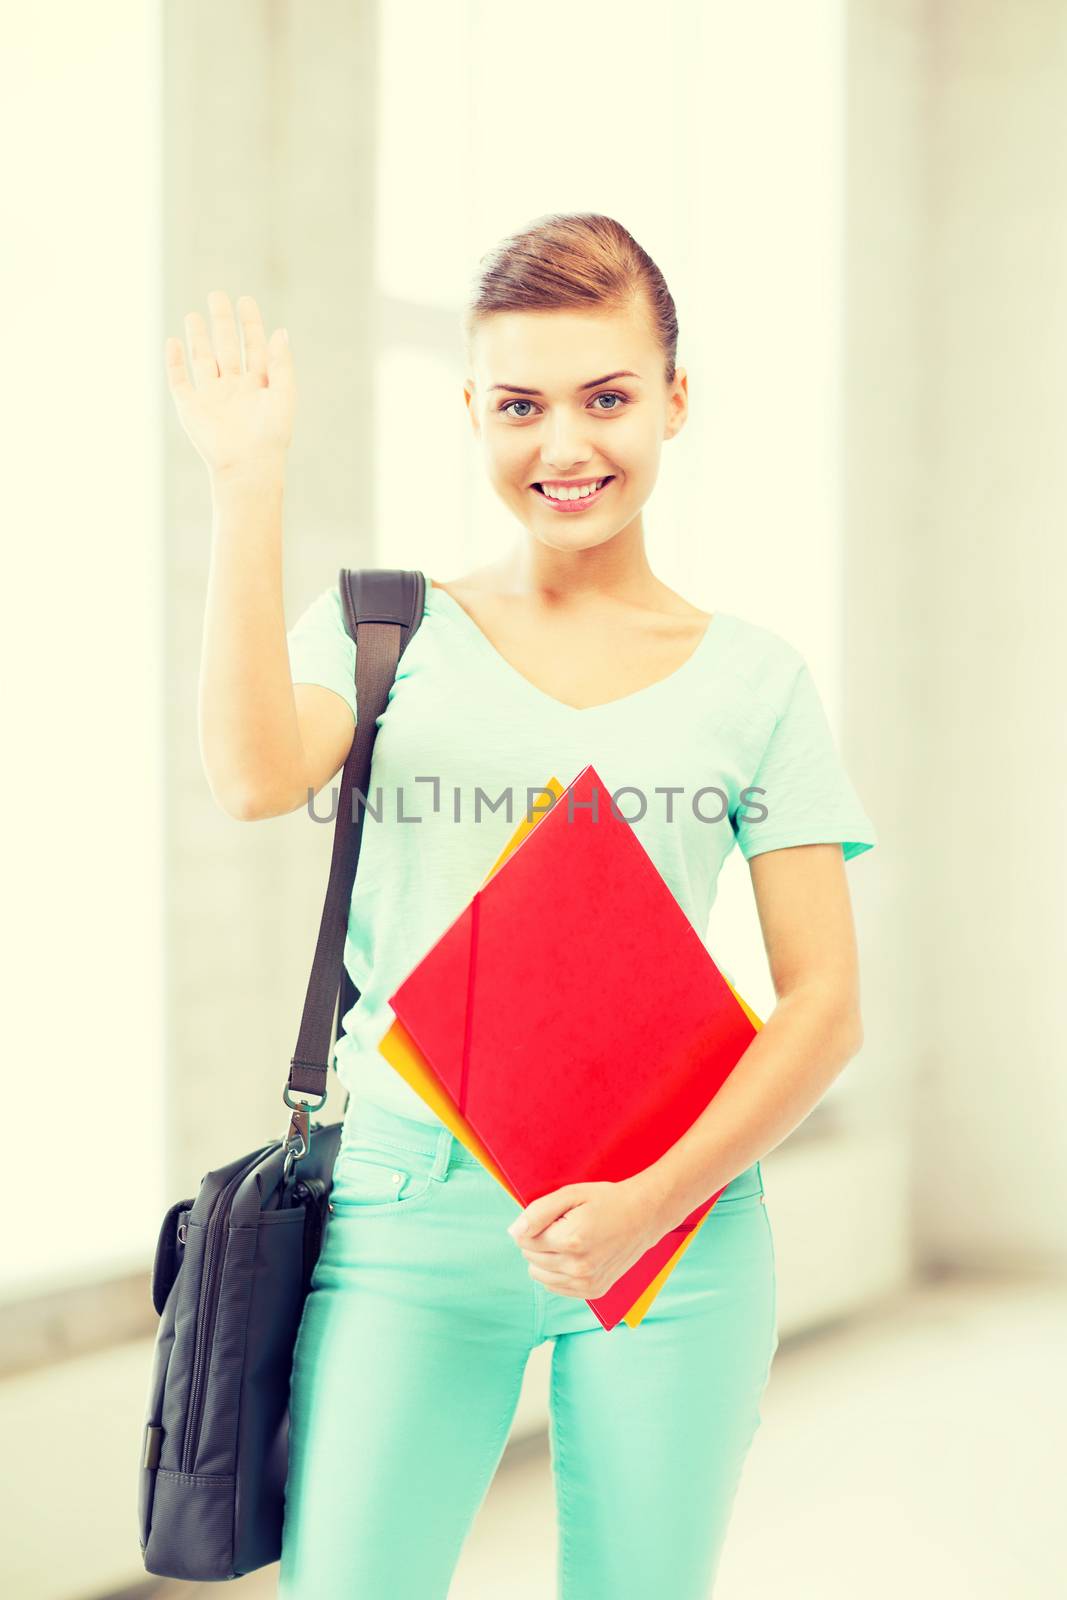 education concept - smiling student with folders and school bag in college